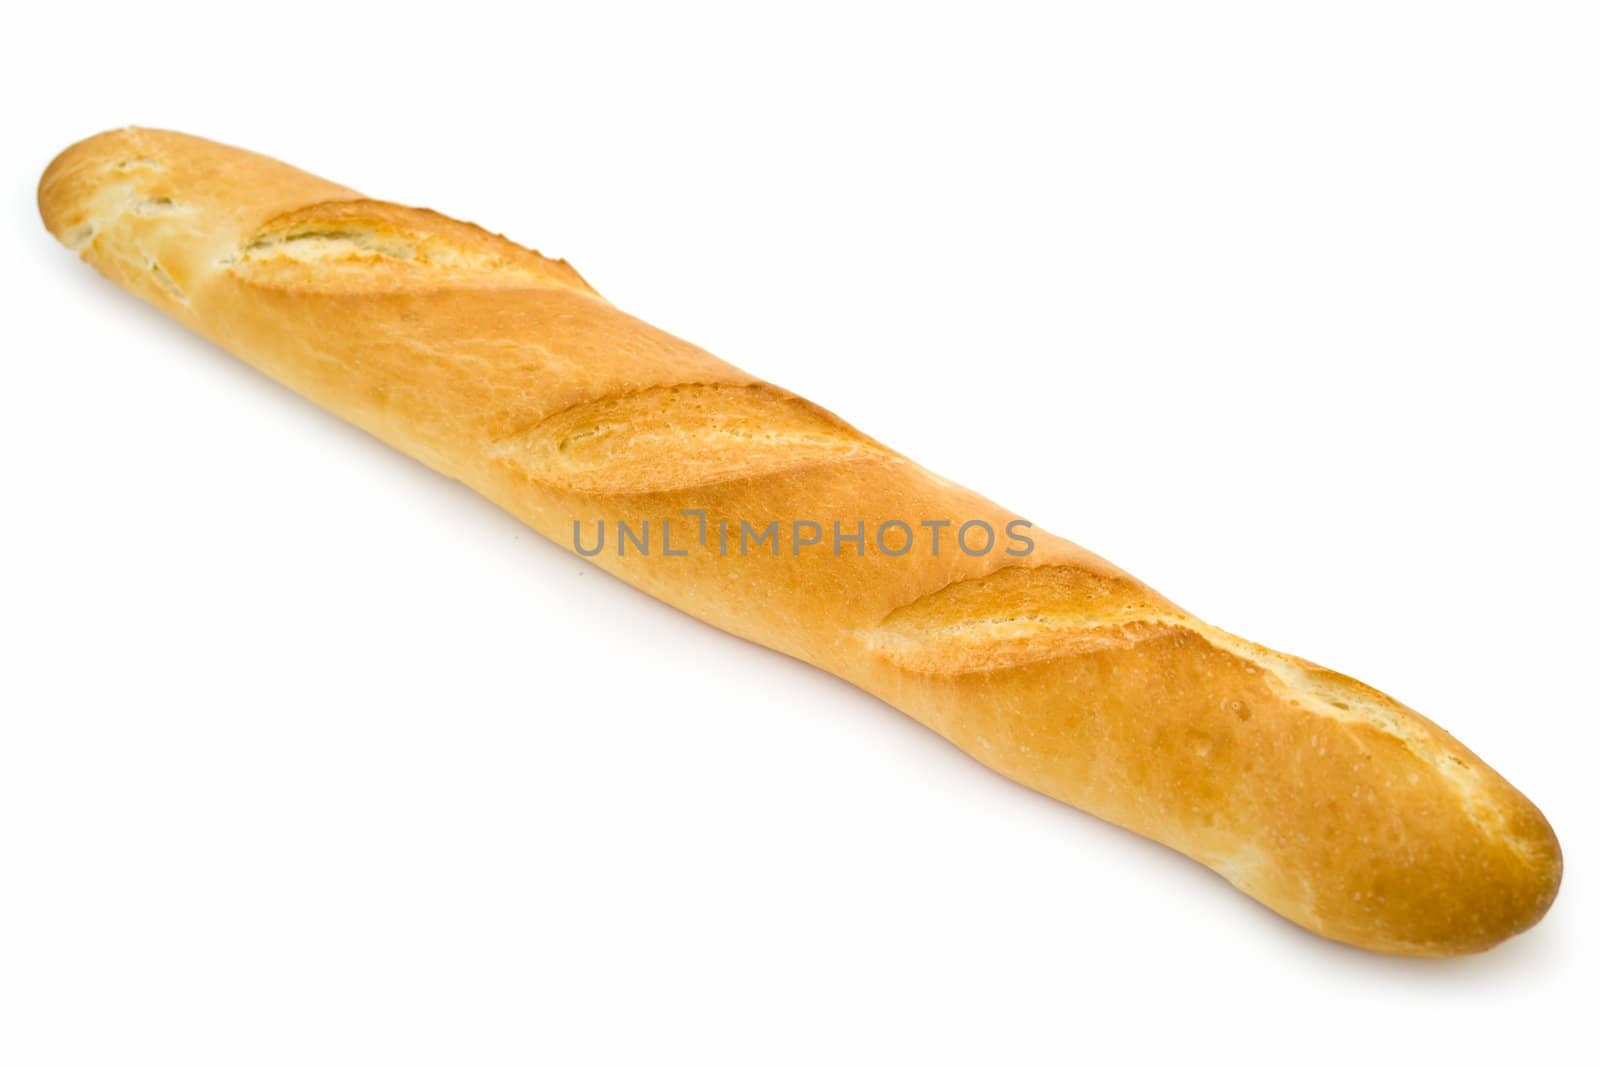 Long loaf. French bread on a white background